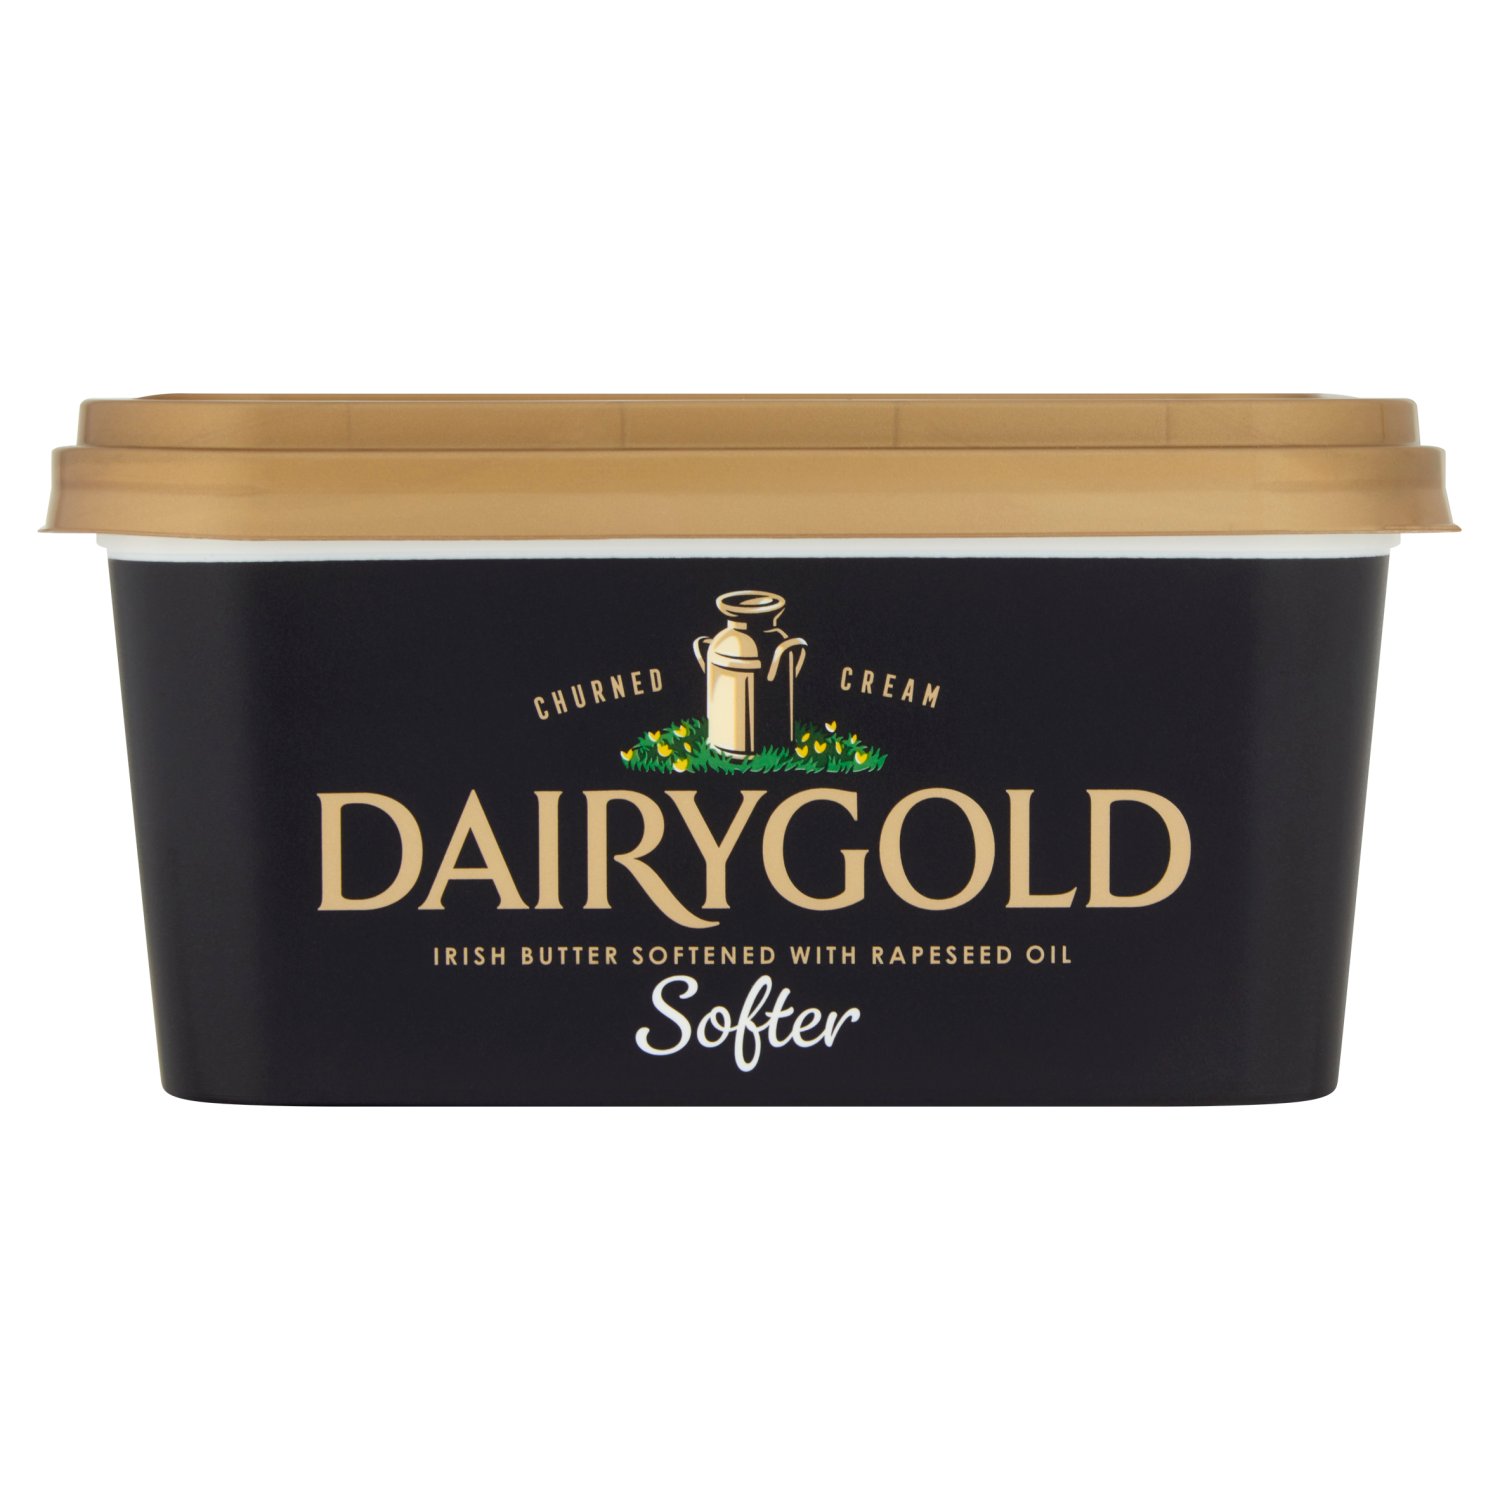 Dairygold Softer (454 g)